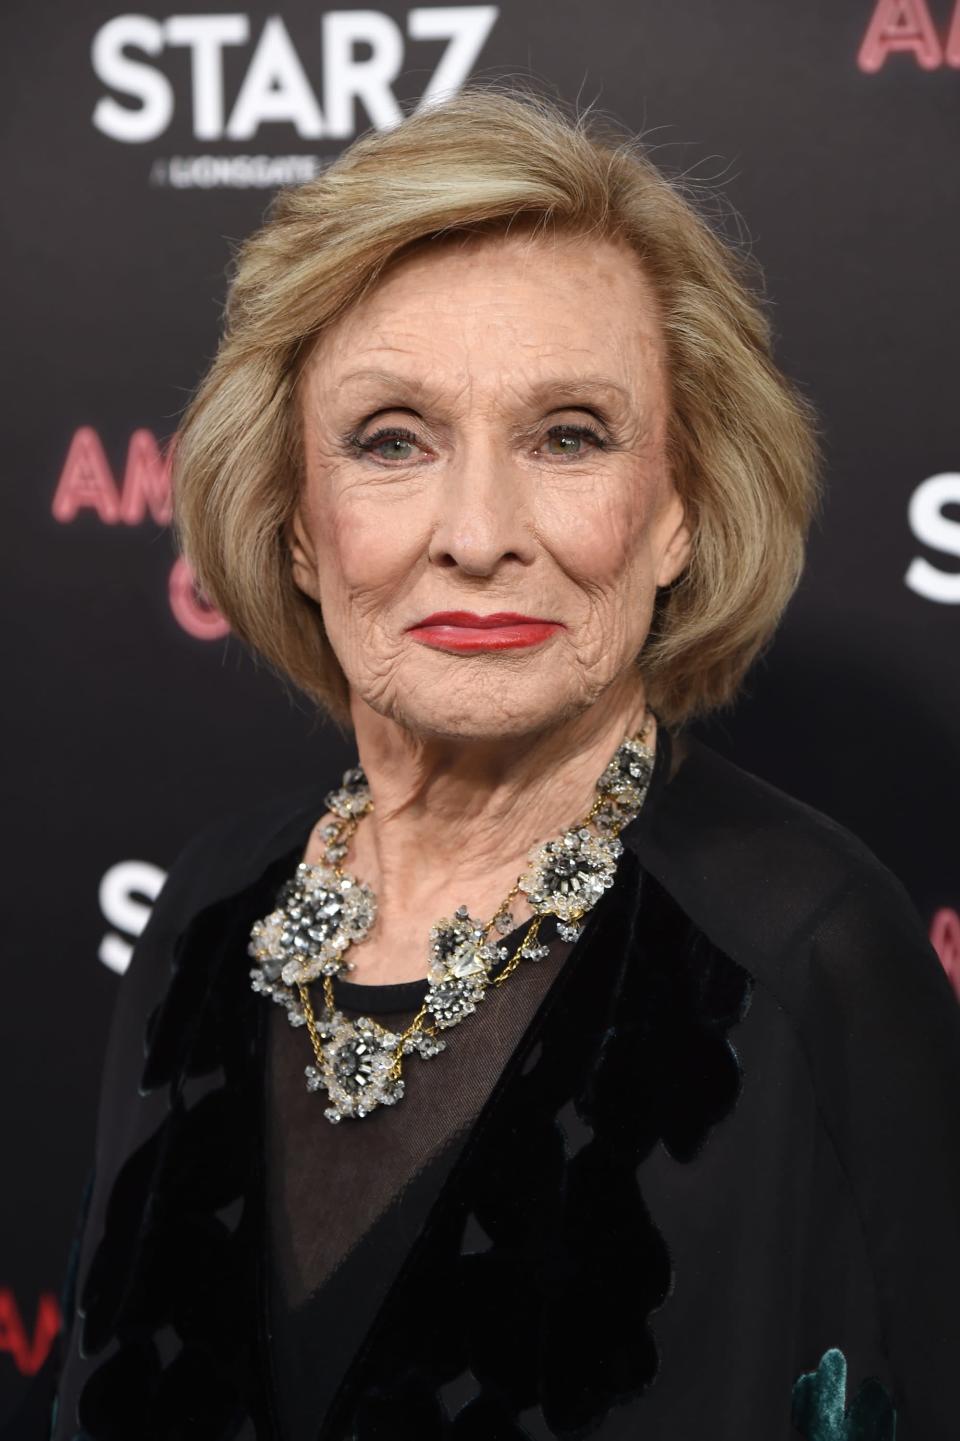 <p>The famed actress, who scored eight Emmy Awards and 22 nominations throughout her career, <a href="https://deadline.com/2021/01/cloris-leachman-dead-mary-tyler-moore-last-picture-show-mel-brooks-1234681853/" class="link " rel="nofollow noopener" target="_blank" data-ylk="slk:died of natural causes on Jan. 26">died of natural causes on Jan. 26</a> at her home in Encinitas, CA. She was 94. </p>